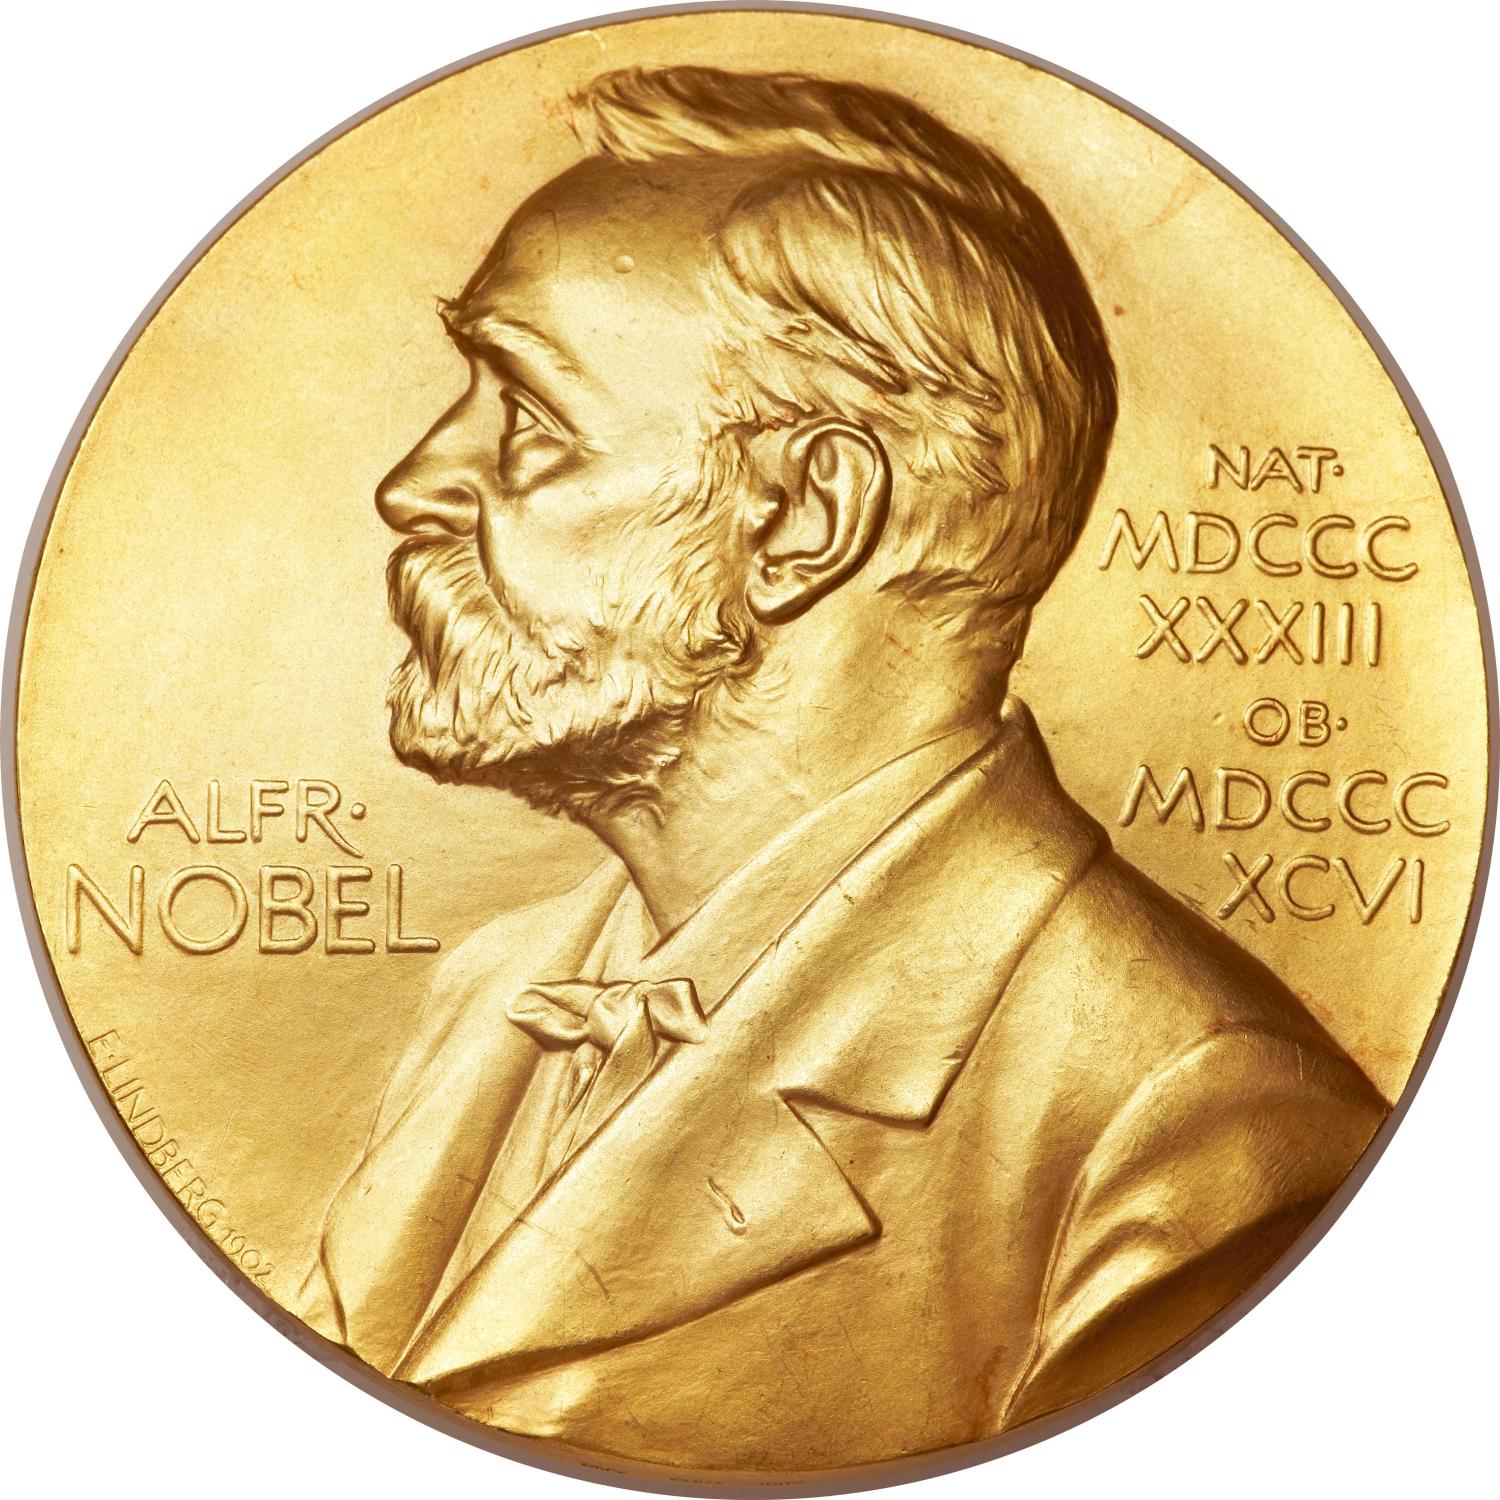 Discoveries on Temperature and Touch Win Nobel in Medicine